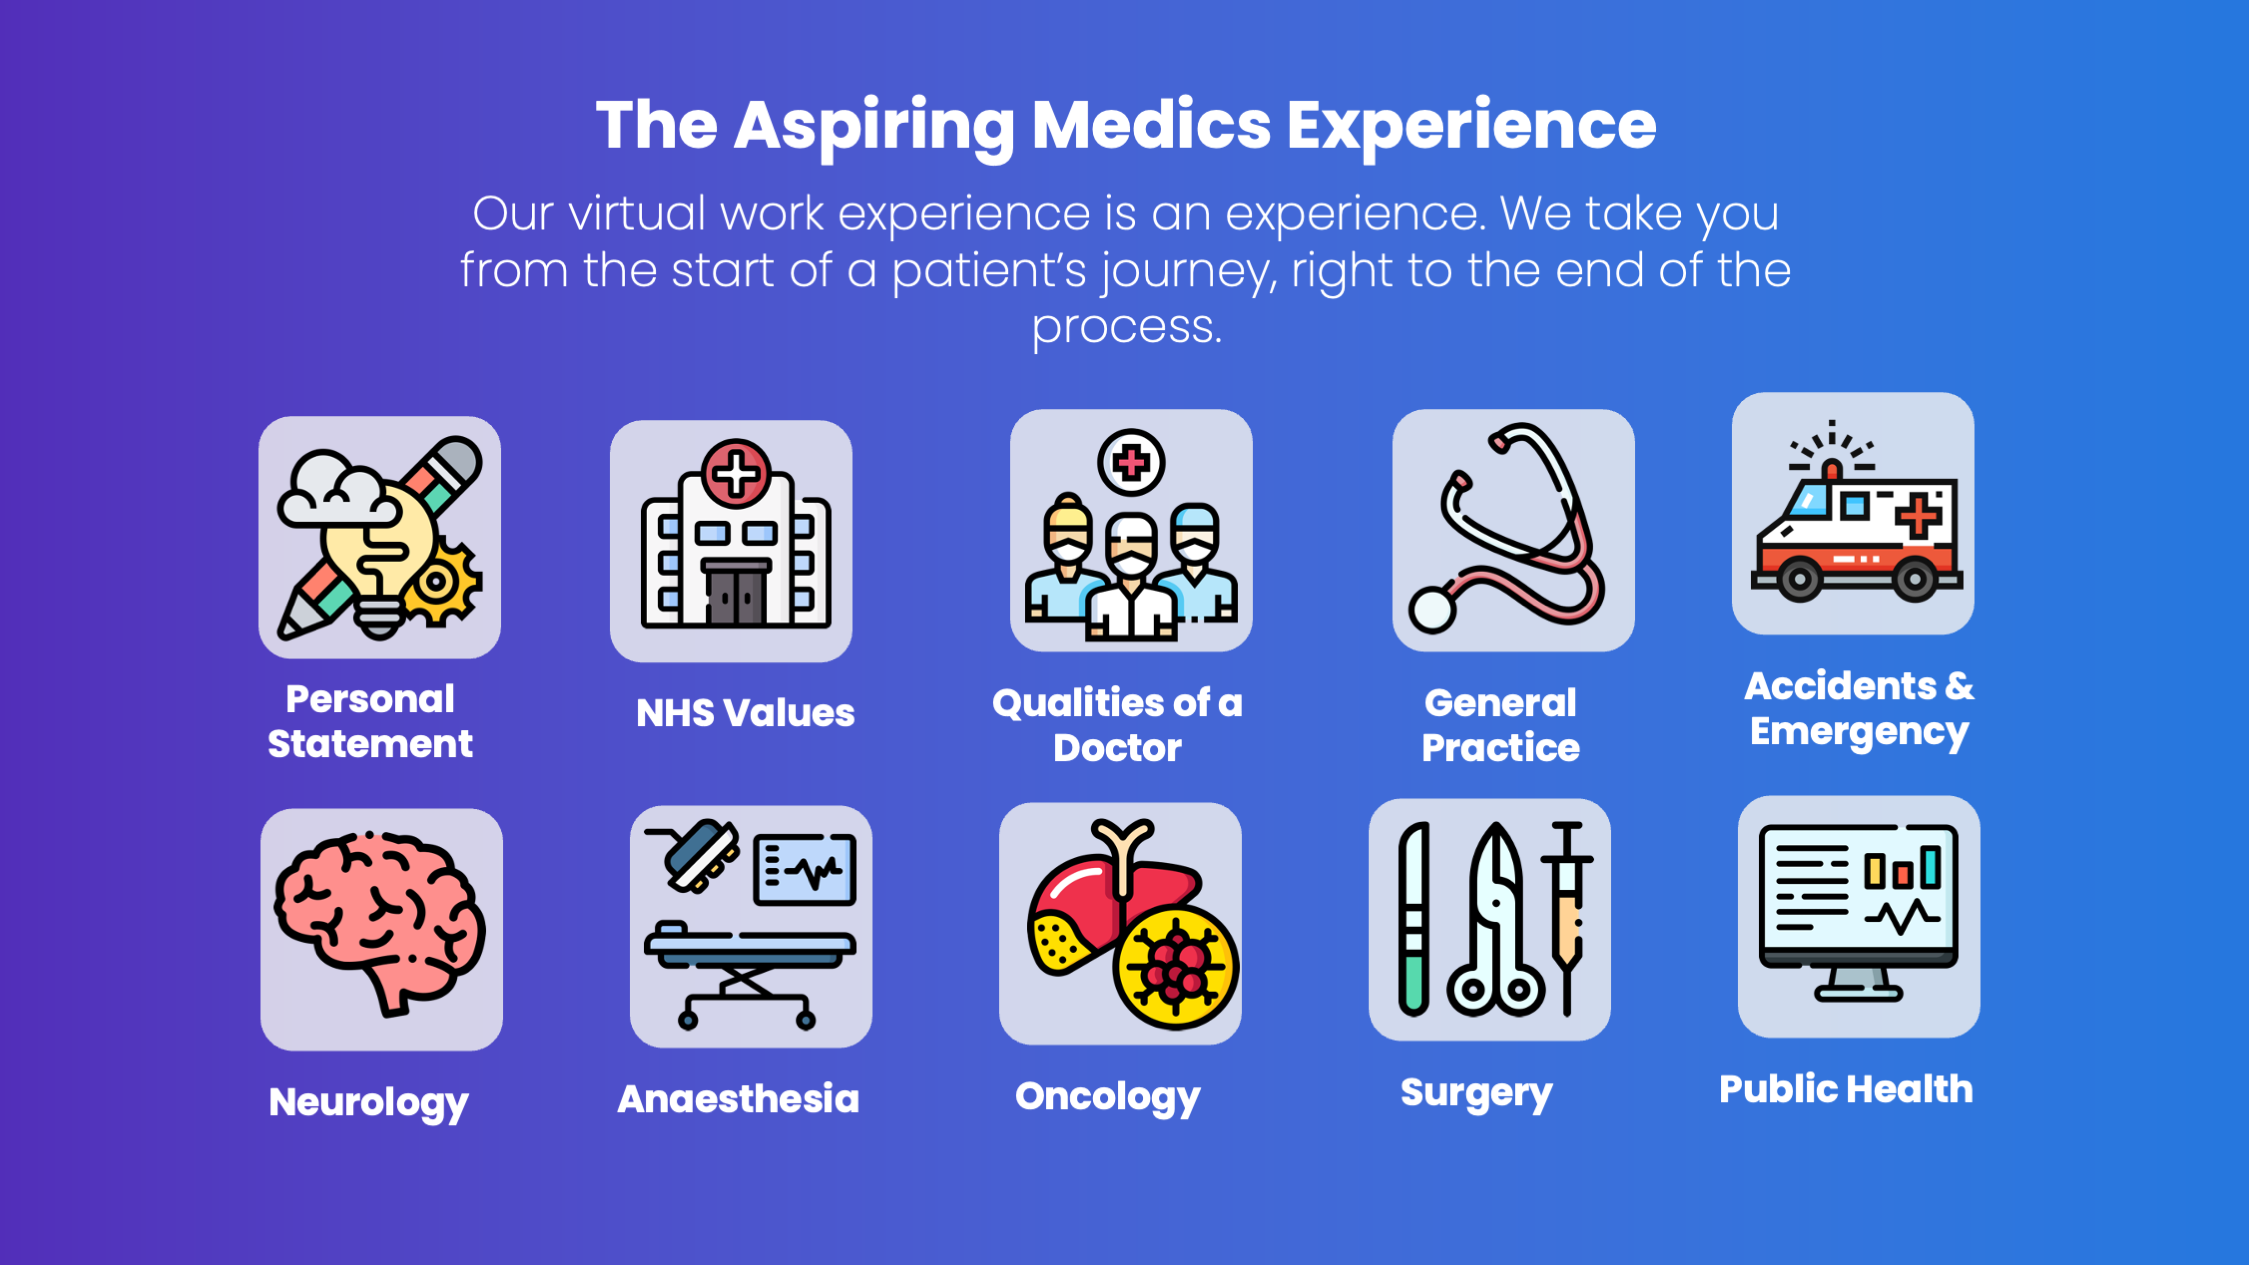 Our virtual work experience is an experience. We take you from the start of a patient&#39;s journey, right to the end of the process. 